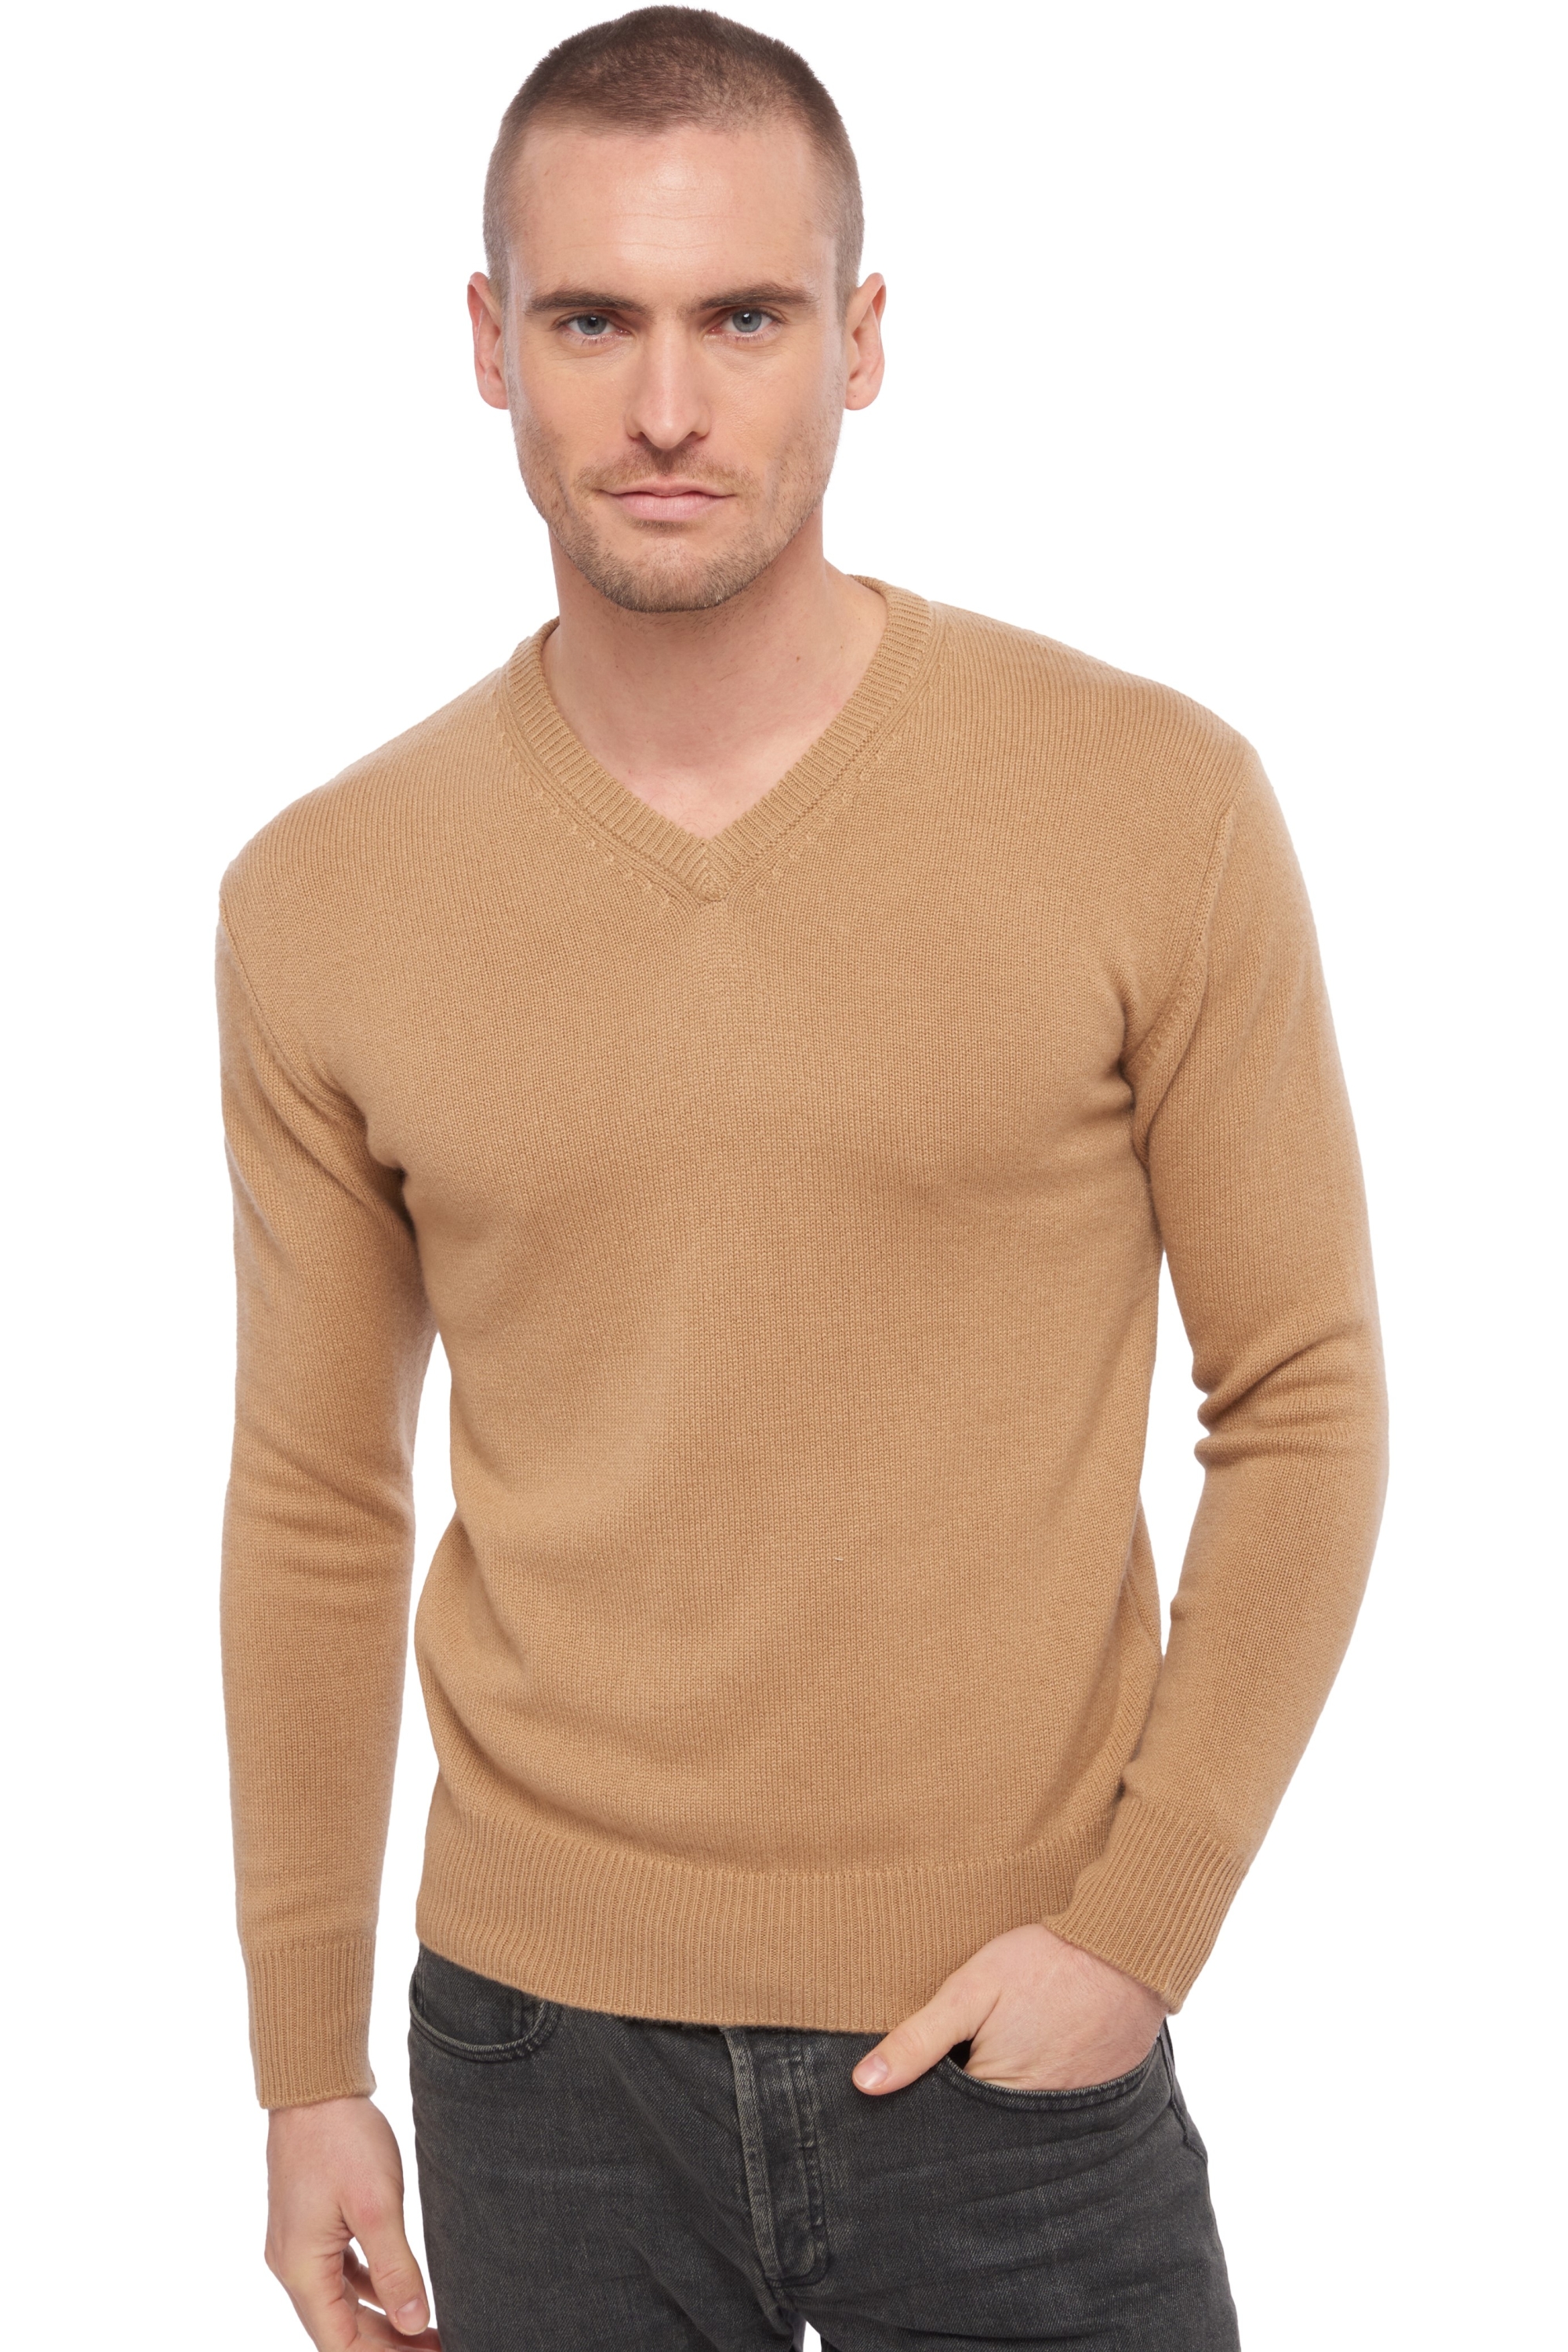 Cachemire pull homme hippolyte 4f camel m